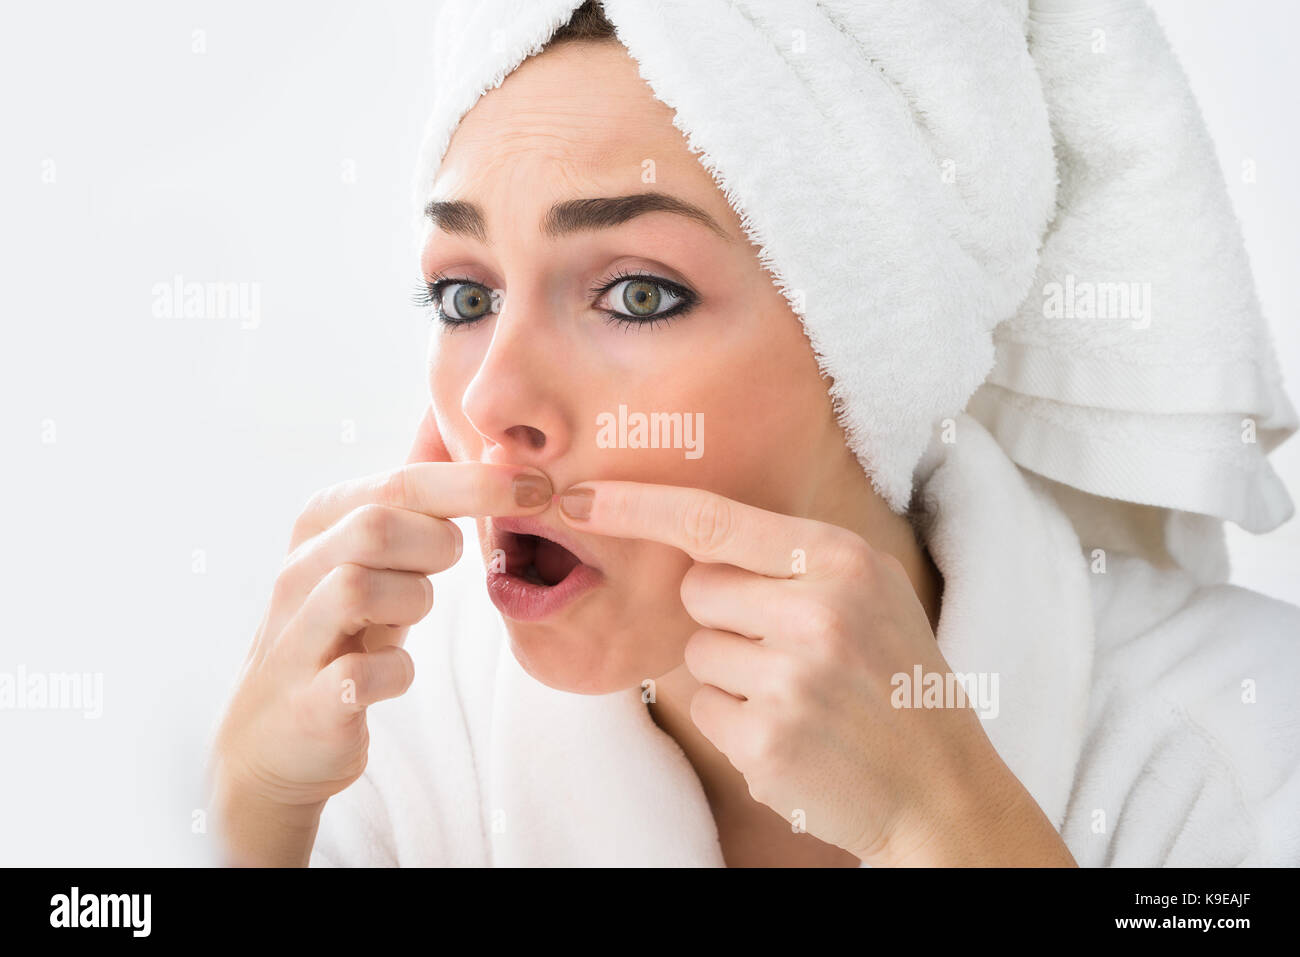 Close-up of woman looking at bouton sur face Banque D'Images